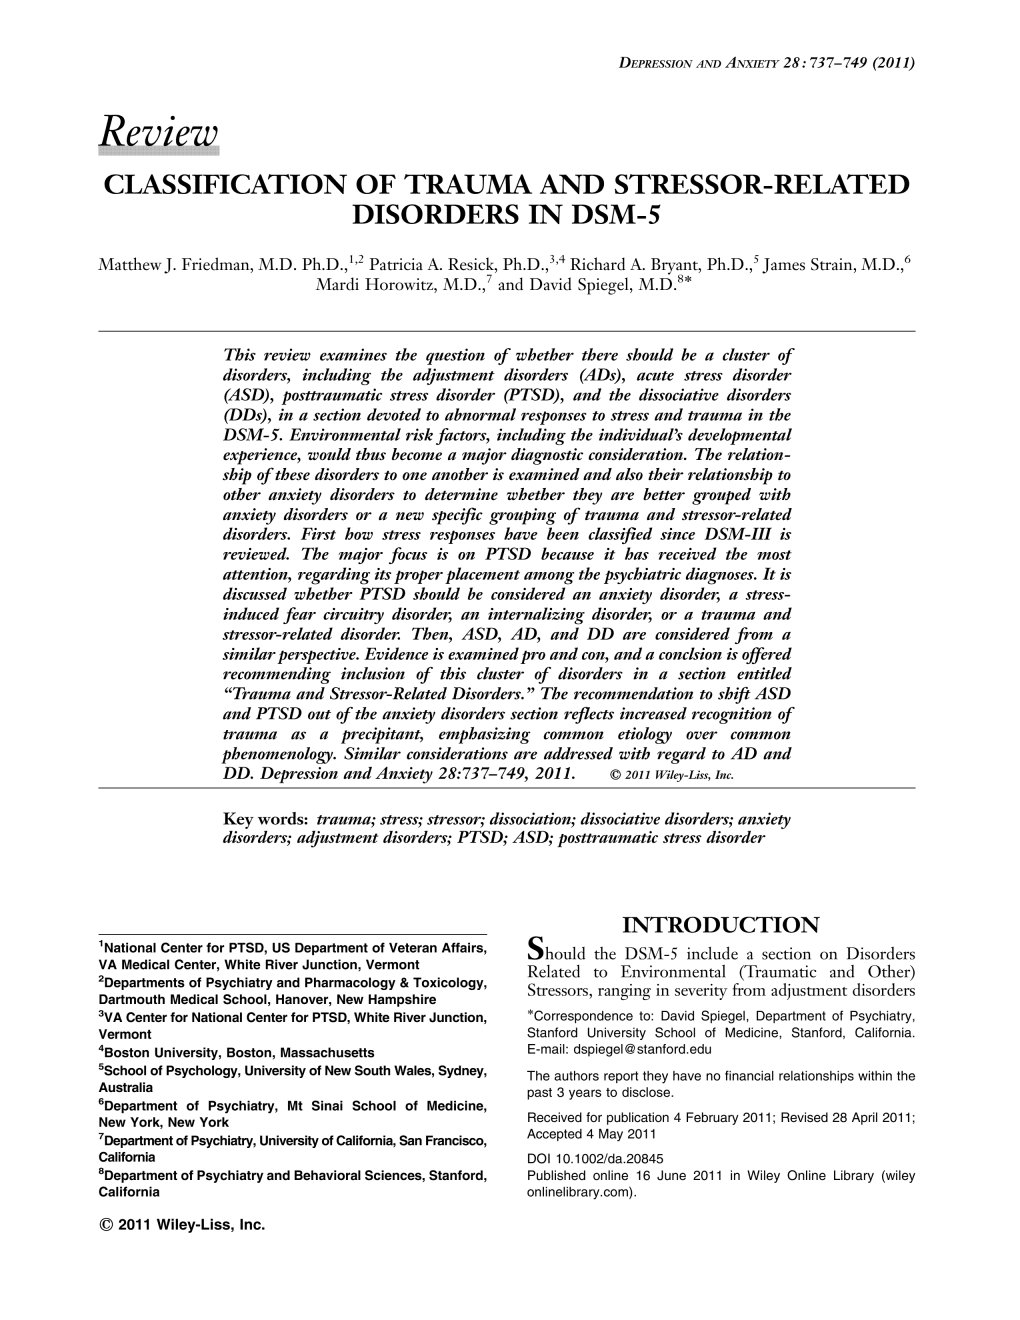 Classification of Trauma and Stressor-Related Disorders in Dsm-5